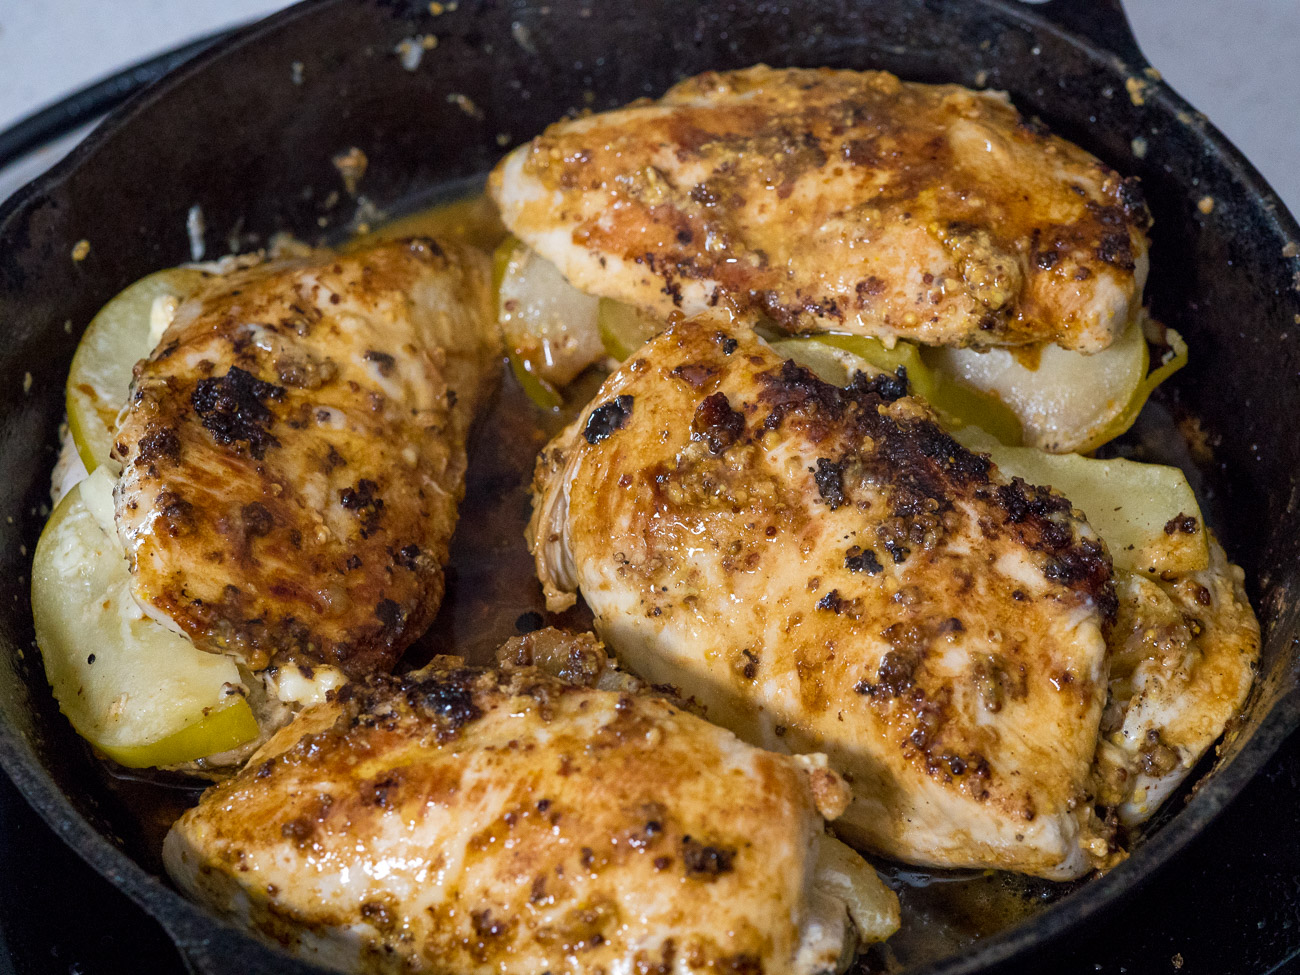 After both sides are seared, cover the pan, reduce the heat to just under medium and cook about 5-8 minutes, or until the chicken is thoroughly cooked.